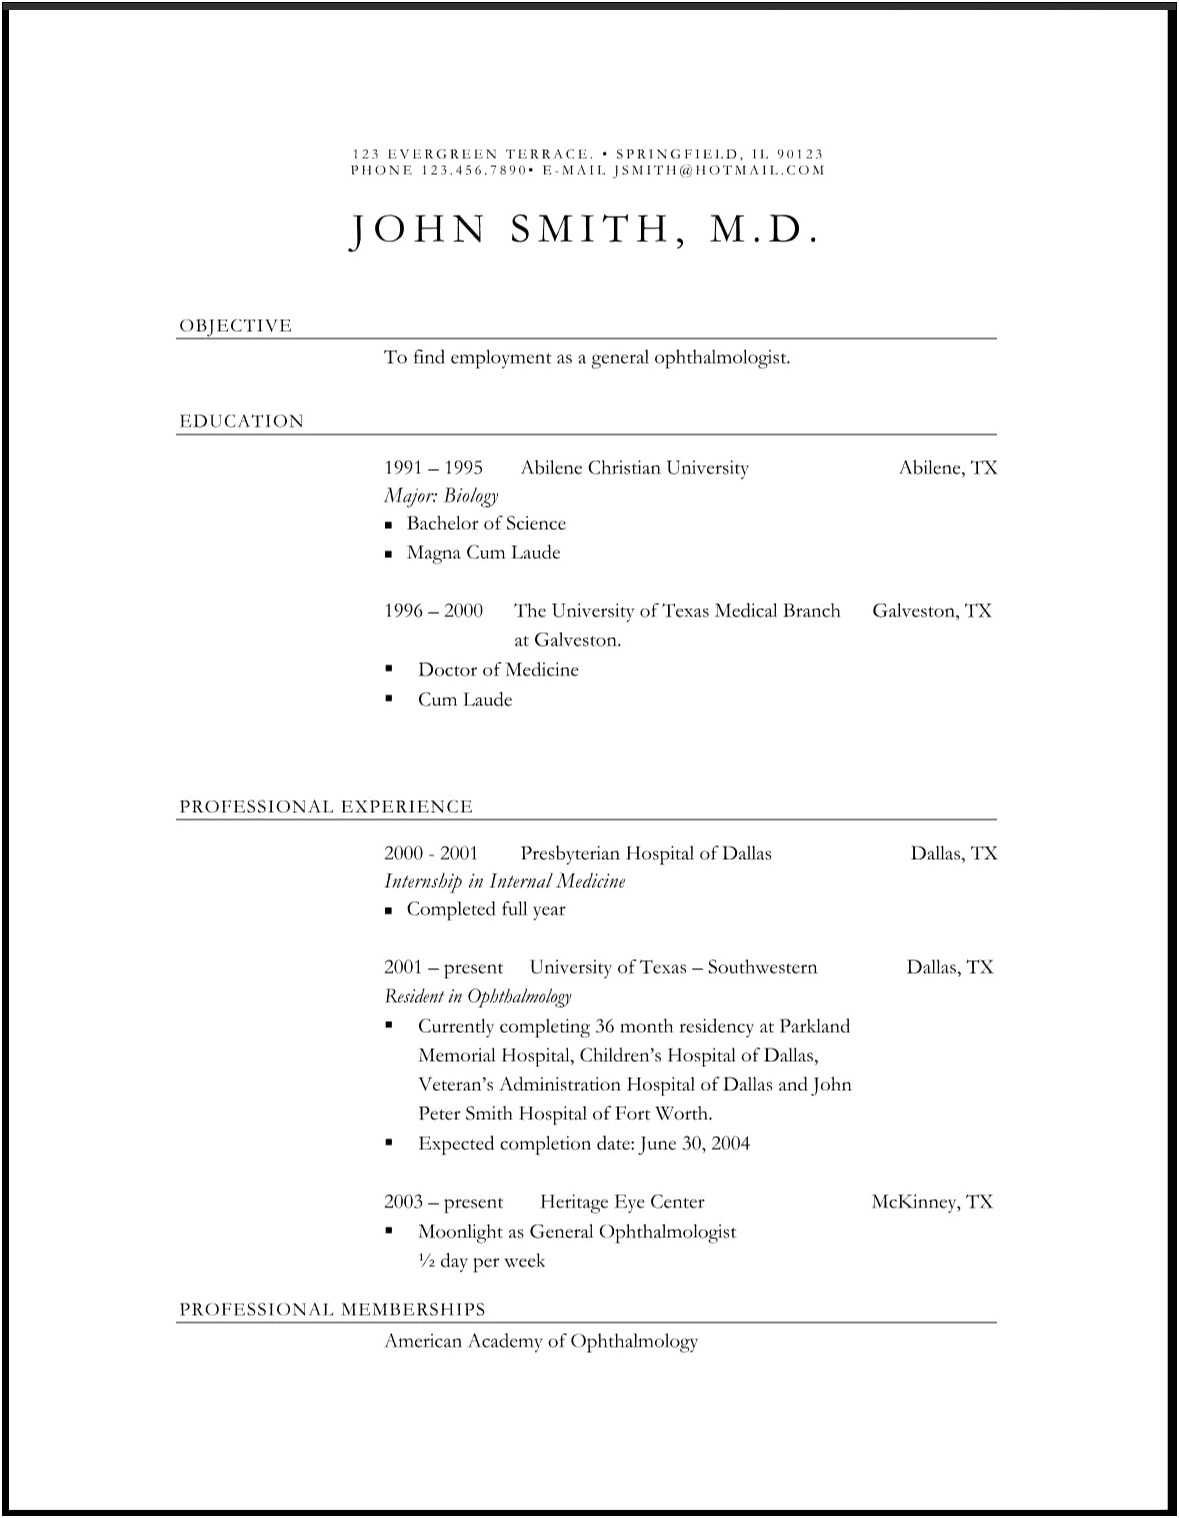 Resume Summary For Doctor Of Business Administration